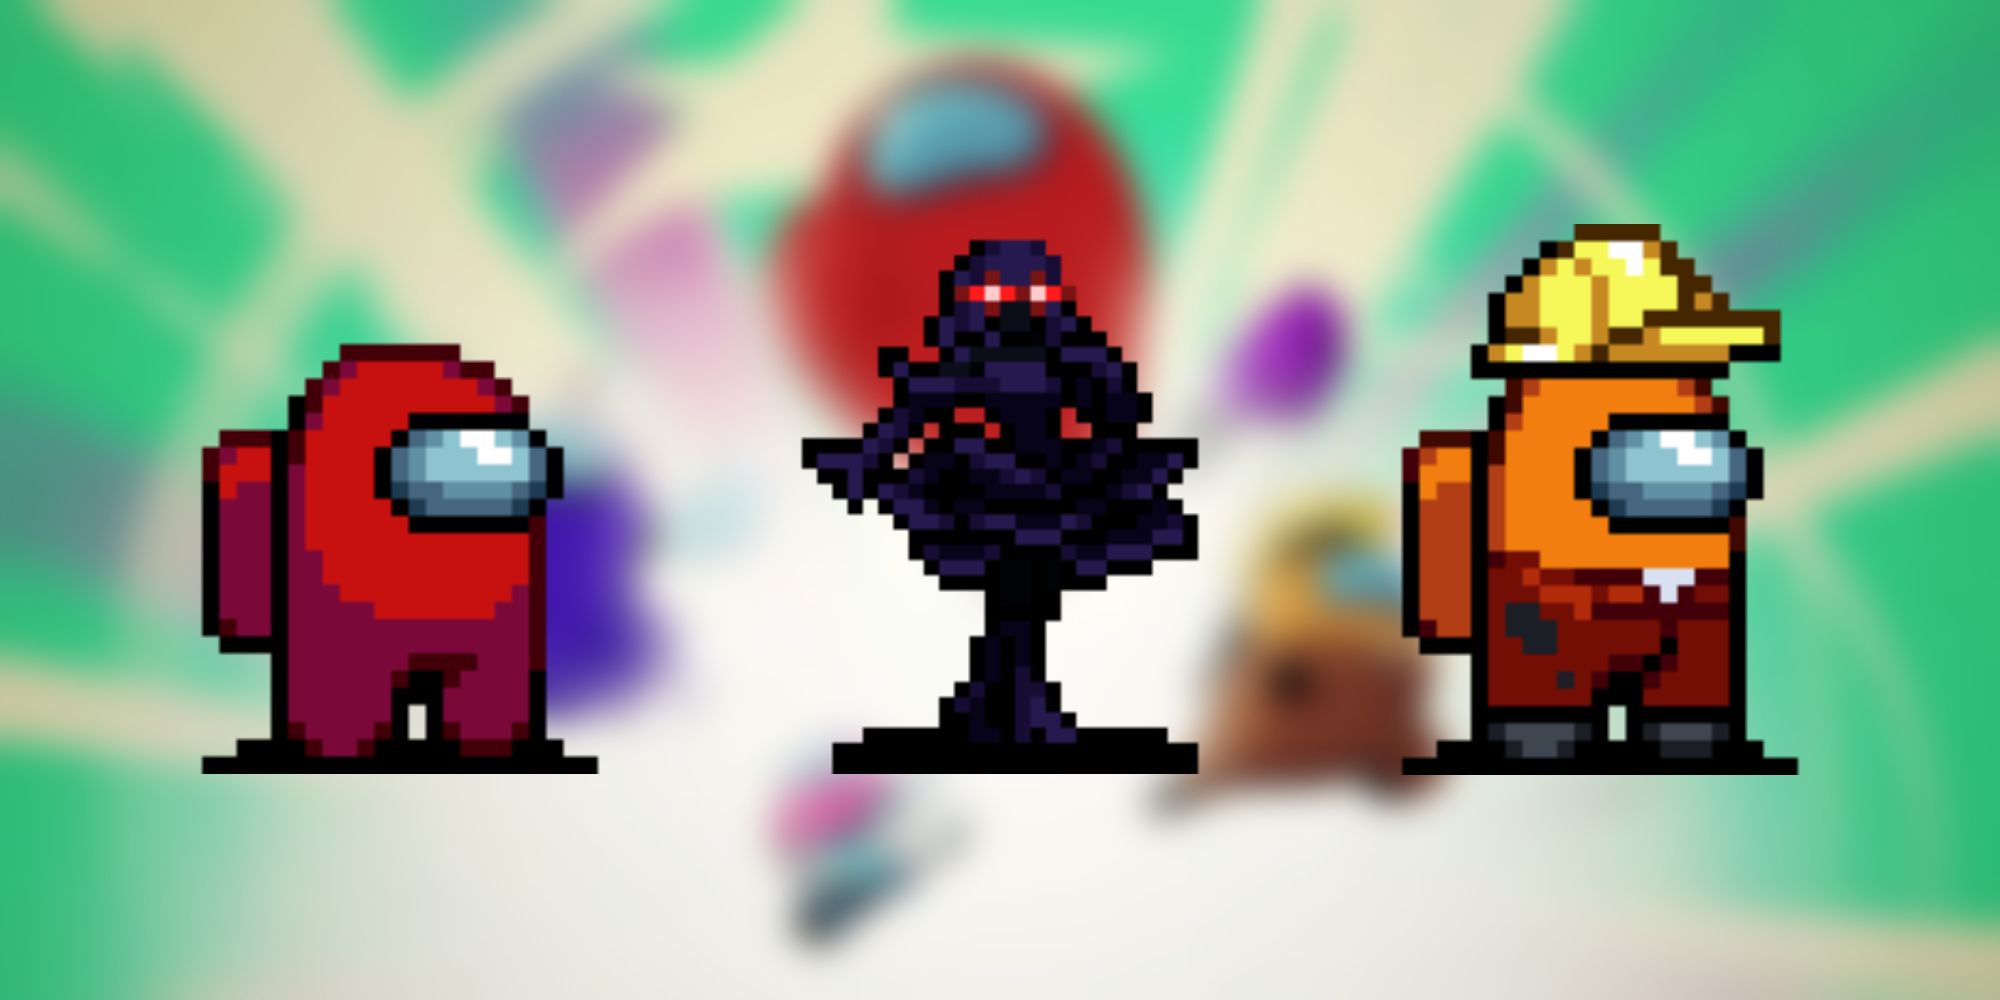 Sprites of three different Vampire Survivors characters on a blurred background.